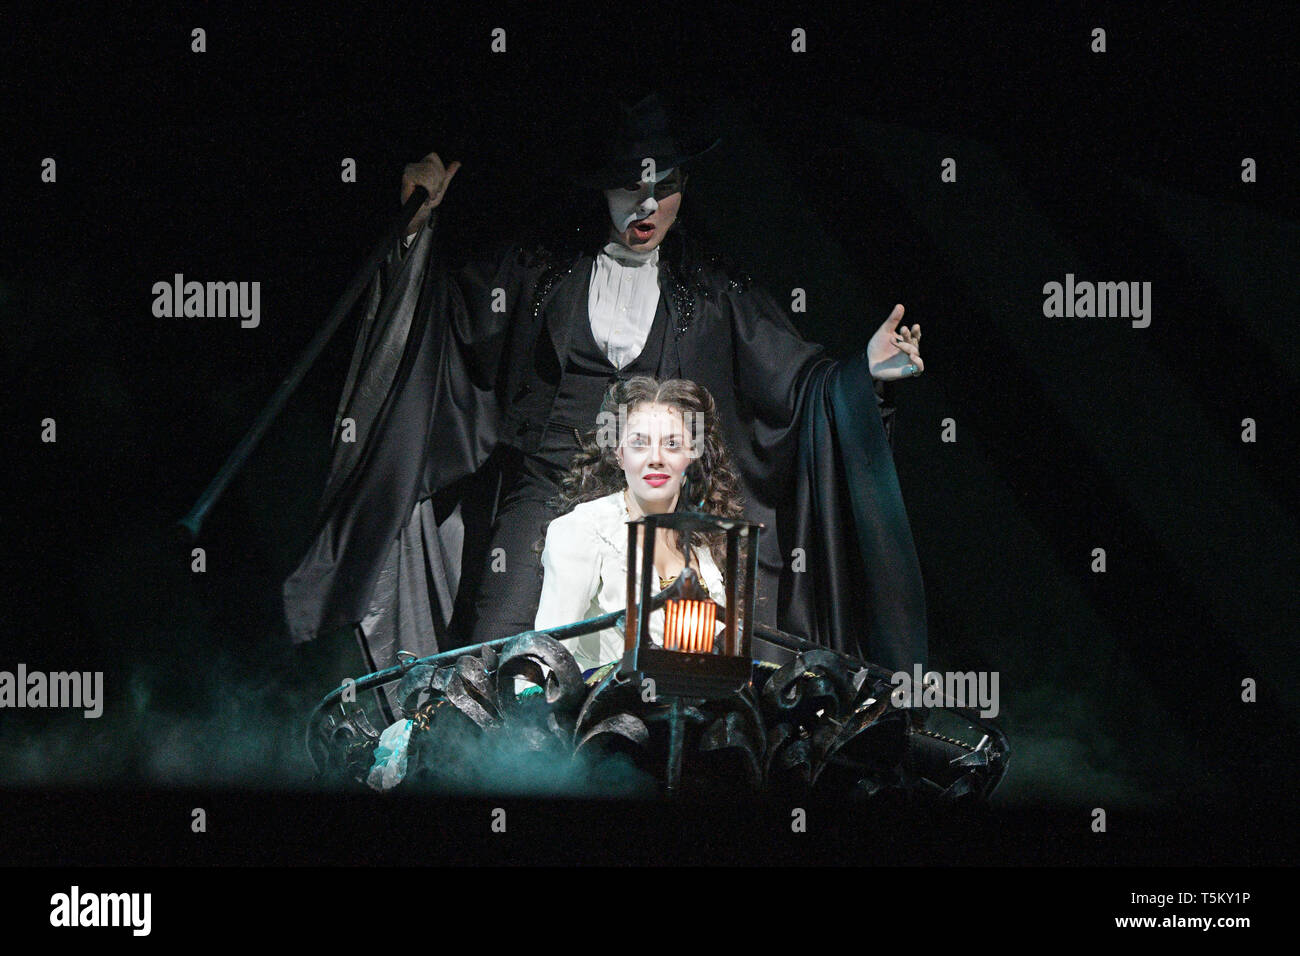 Singapore. 25th Apr, 2019. Actors perform during the media preview of the musical 'Phantom of the Opera' at the Marina Bay Sands Theatre in Singapore on April 25, 2019. Credit: Then Chih Wey/Xinhua/Alamy Live News Stock Photo